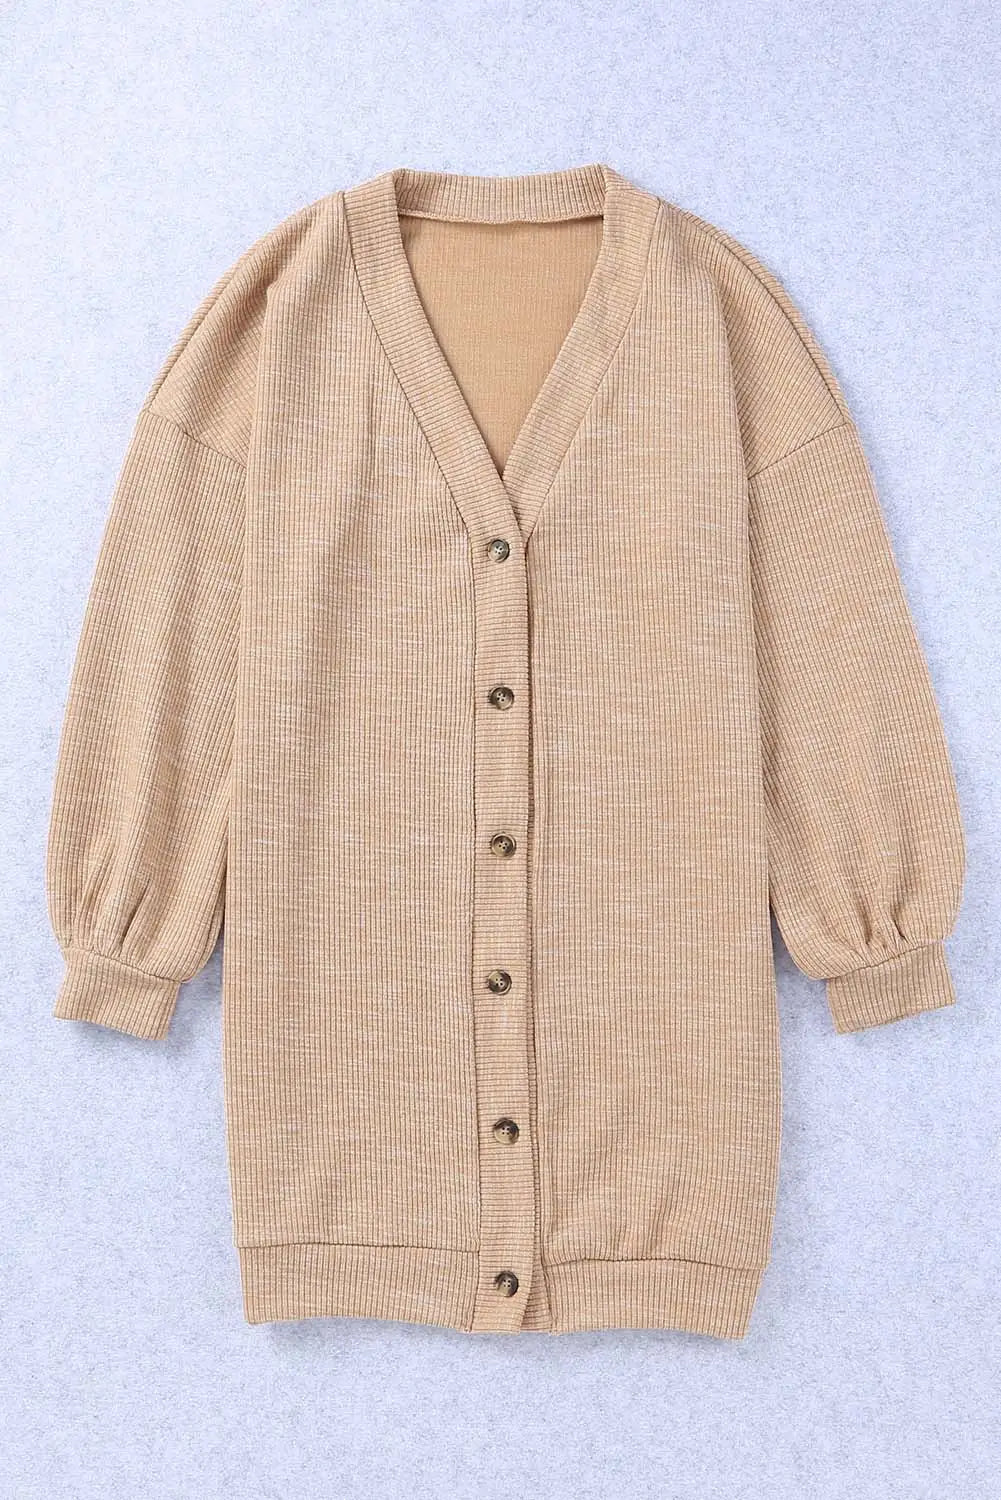 Apricot ribbed buttons v neck cardigan - tops